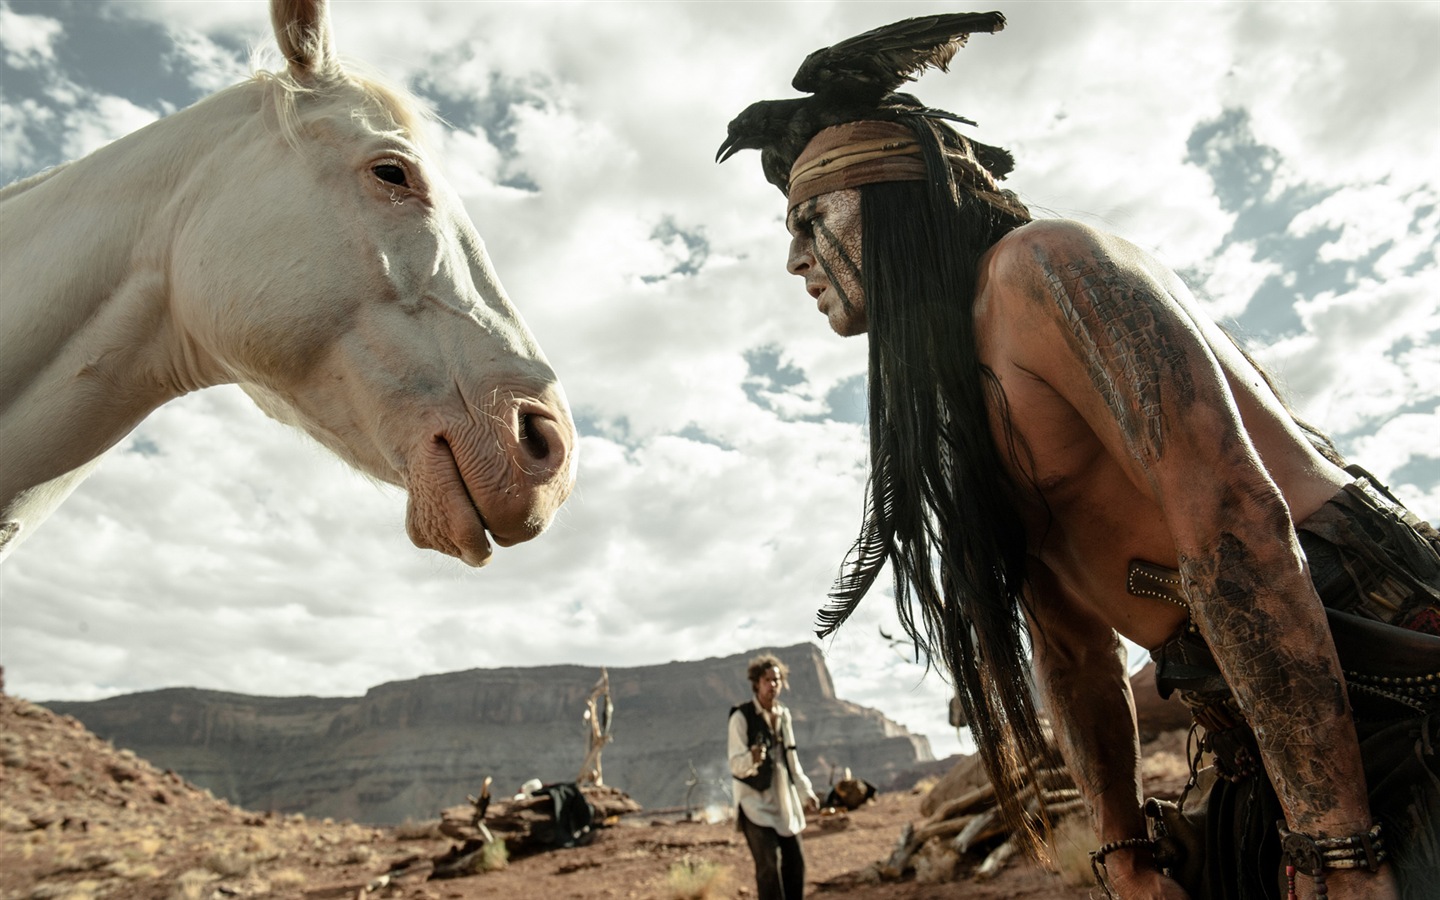 The Lone Ranger HD movie wallpapers #19 - 1440x900